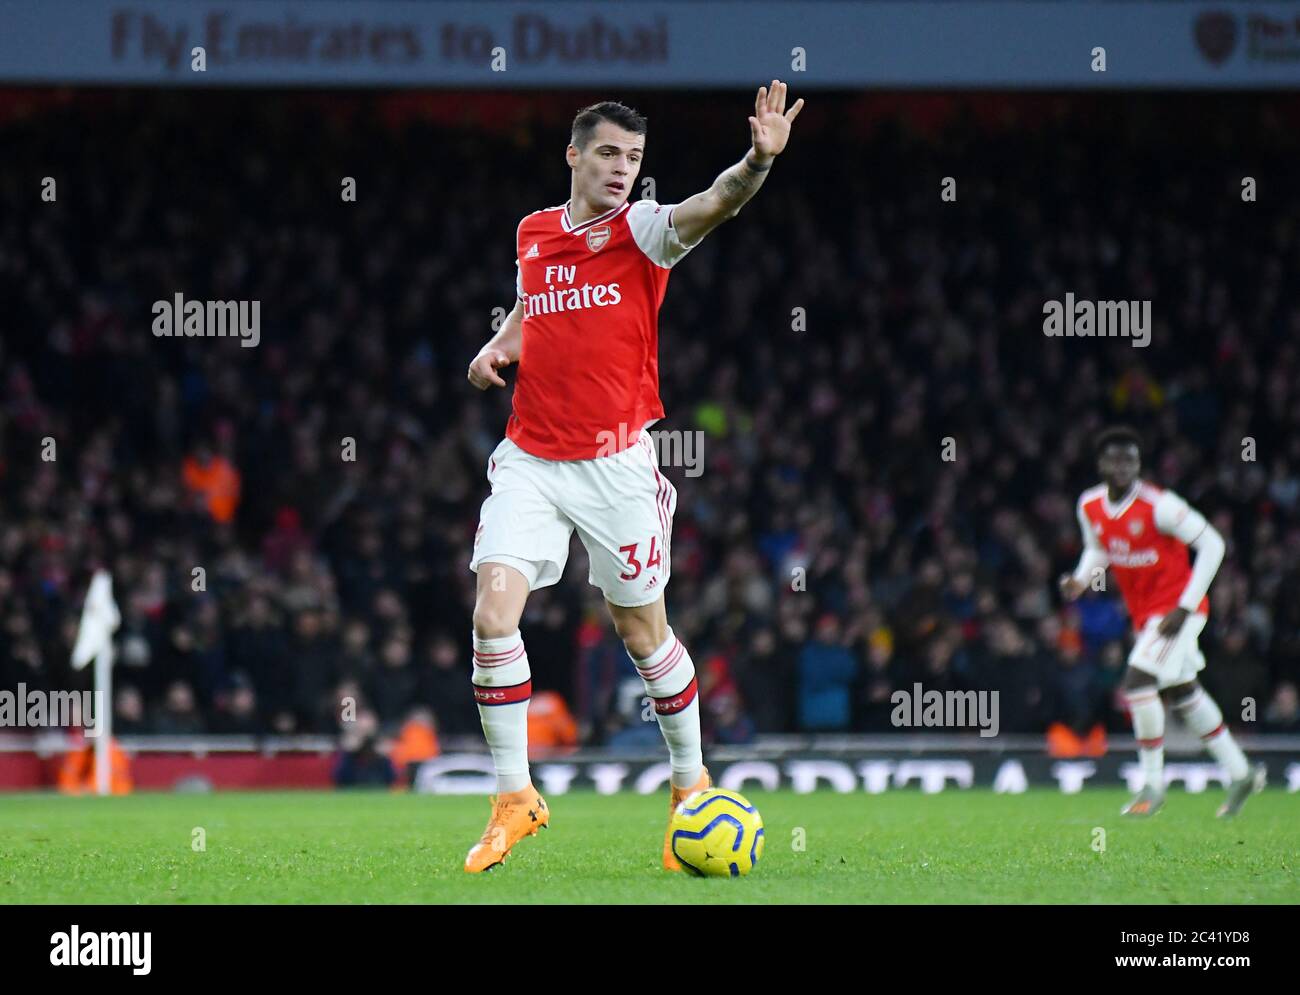 LONDON, ENGLAND - JANUARY 18, 2020: Granit Xhaka of Arsenal pictured during the 2019/20 Premier League game between Arsenal FC and Sheffield United FC at Emirates Stadium. Stock Photo